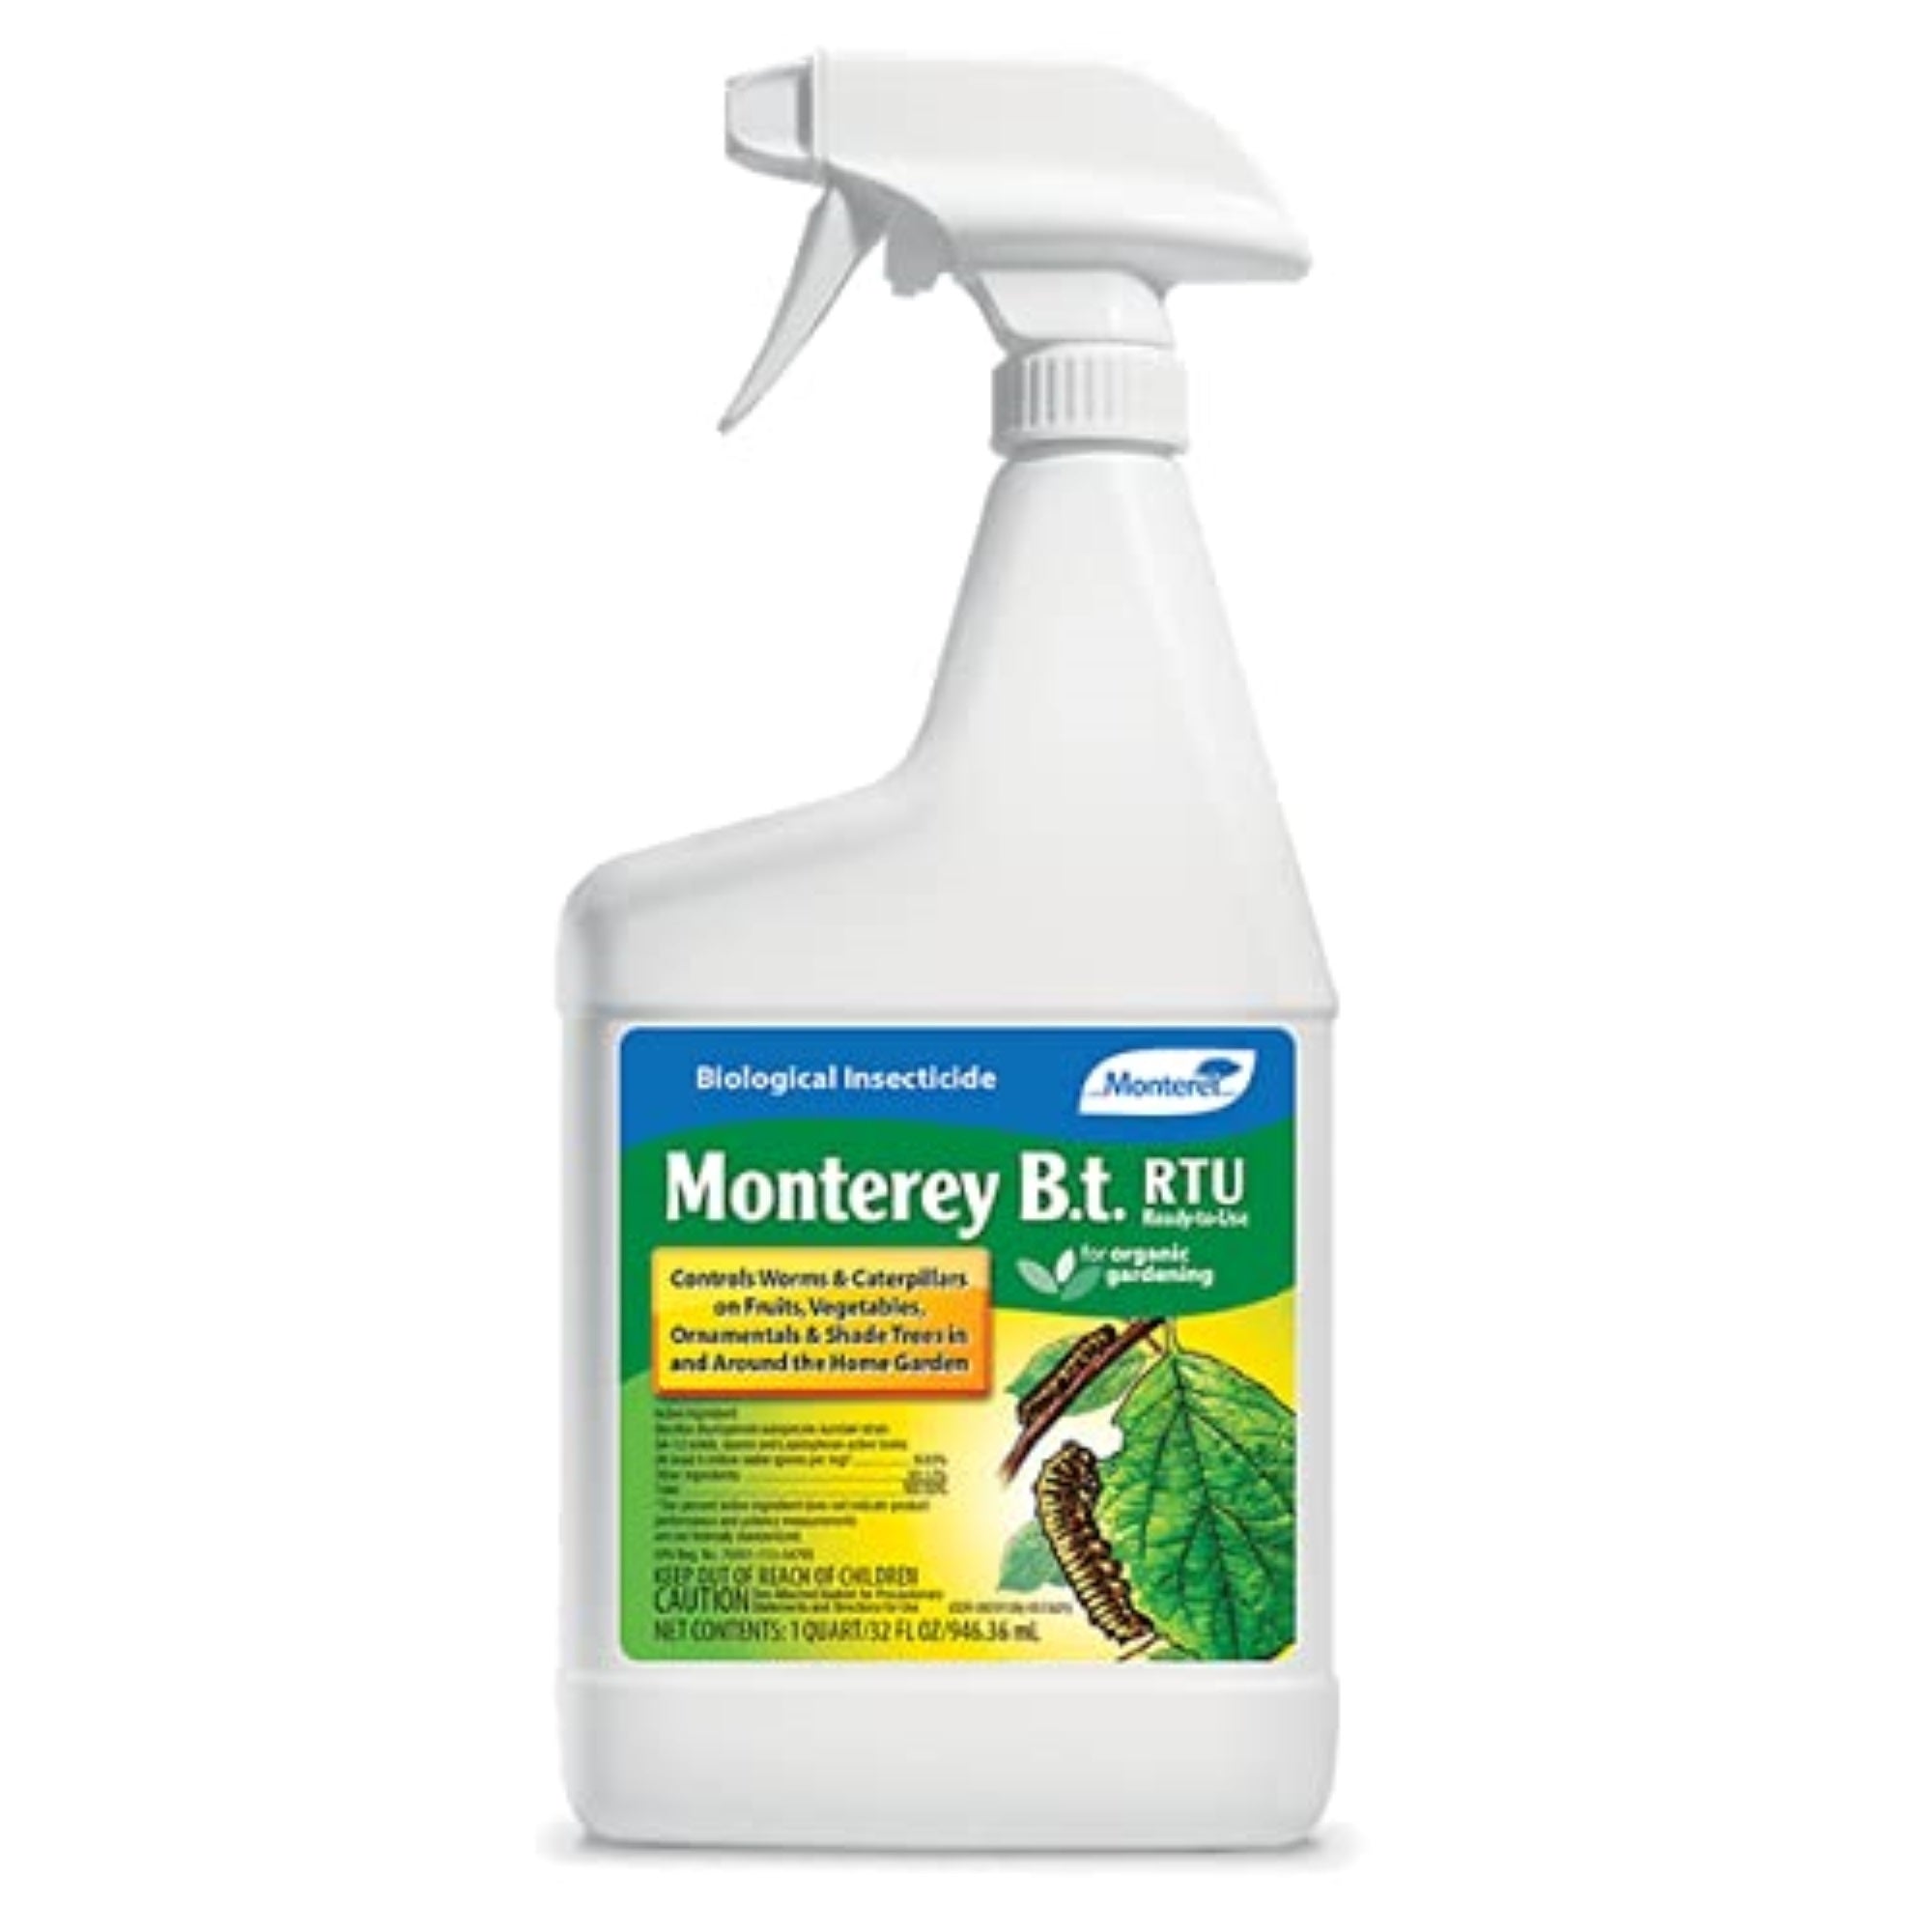 Monterey Bacillus Thuringiensis Biological Insecticide Ready To Use Organic, 32 Oz